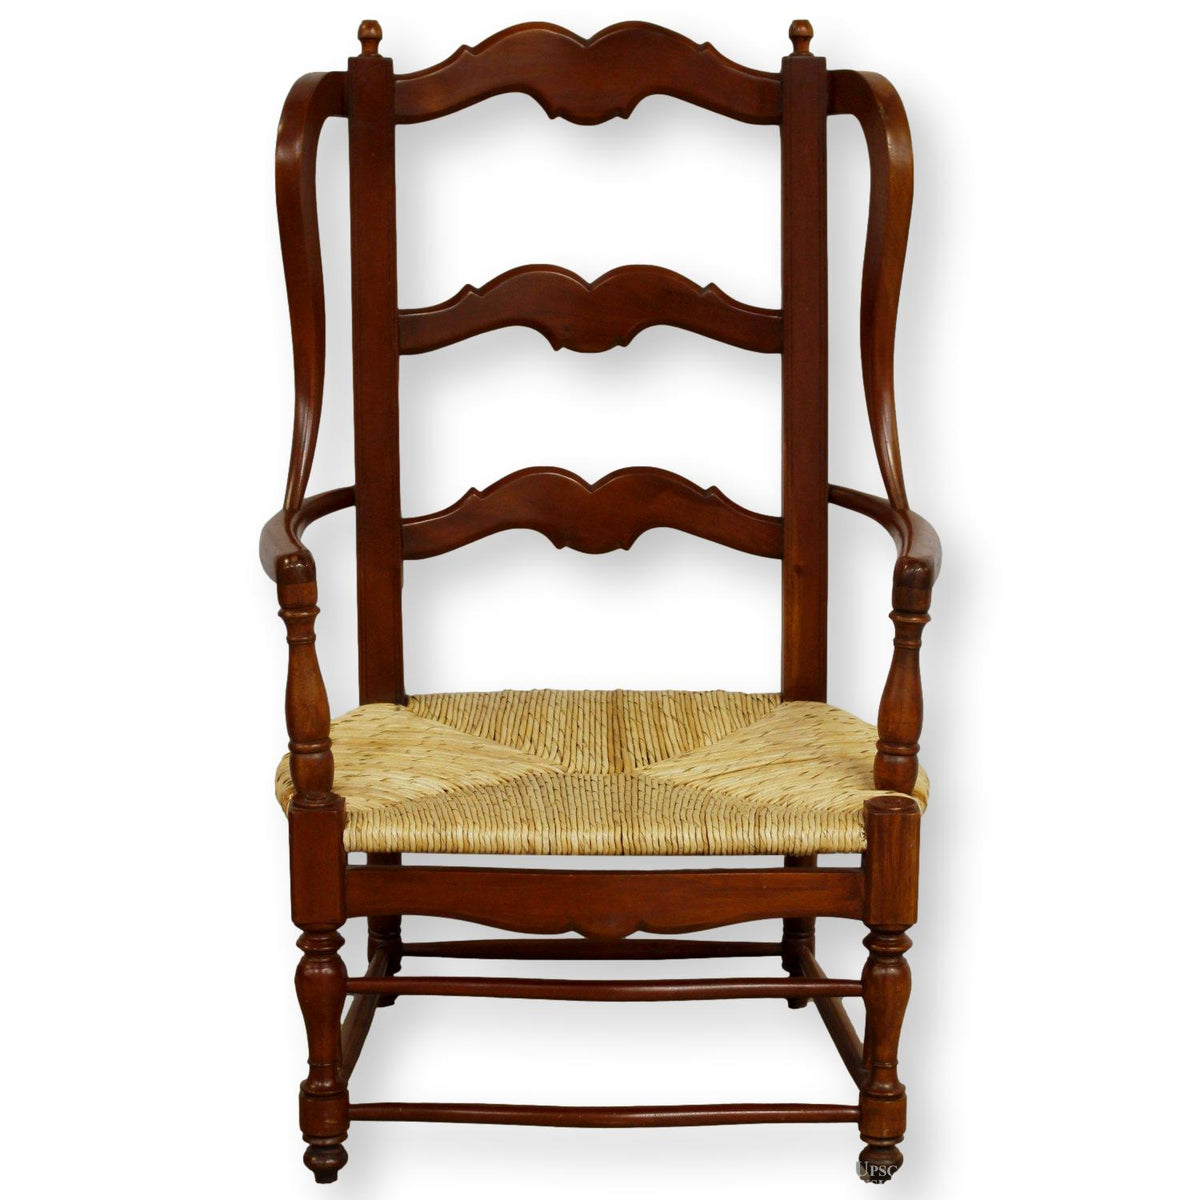 French Country Ladderback Accent Chair